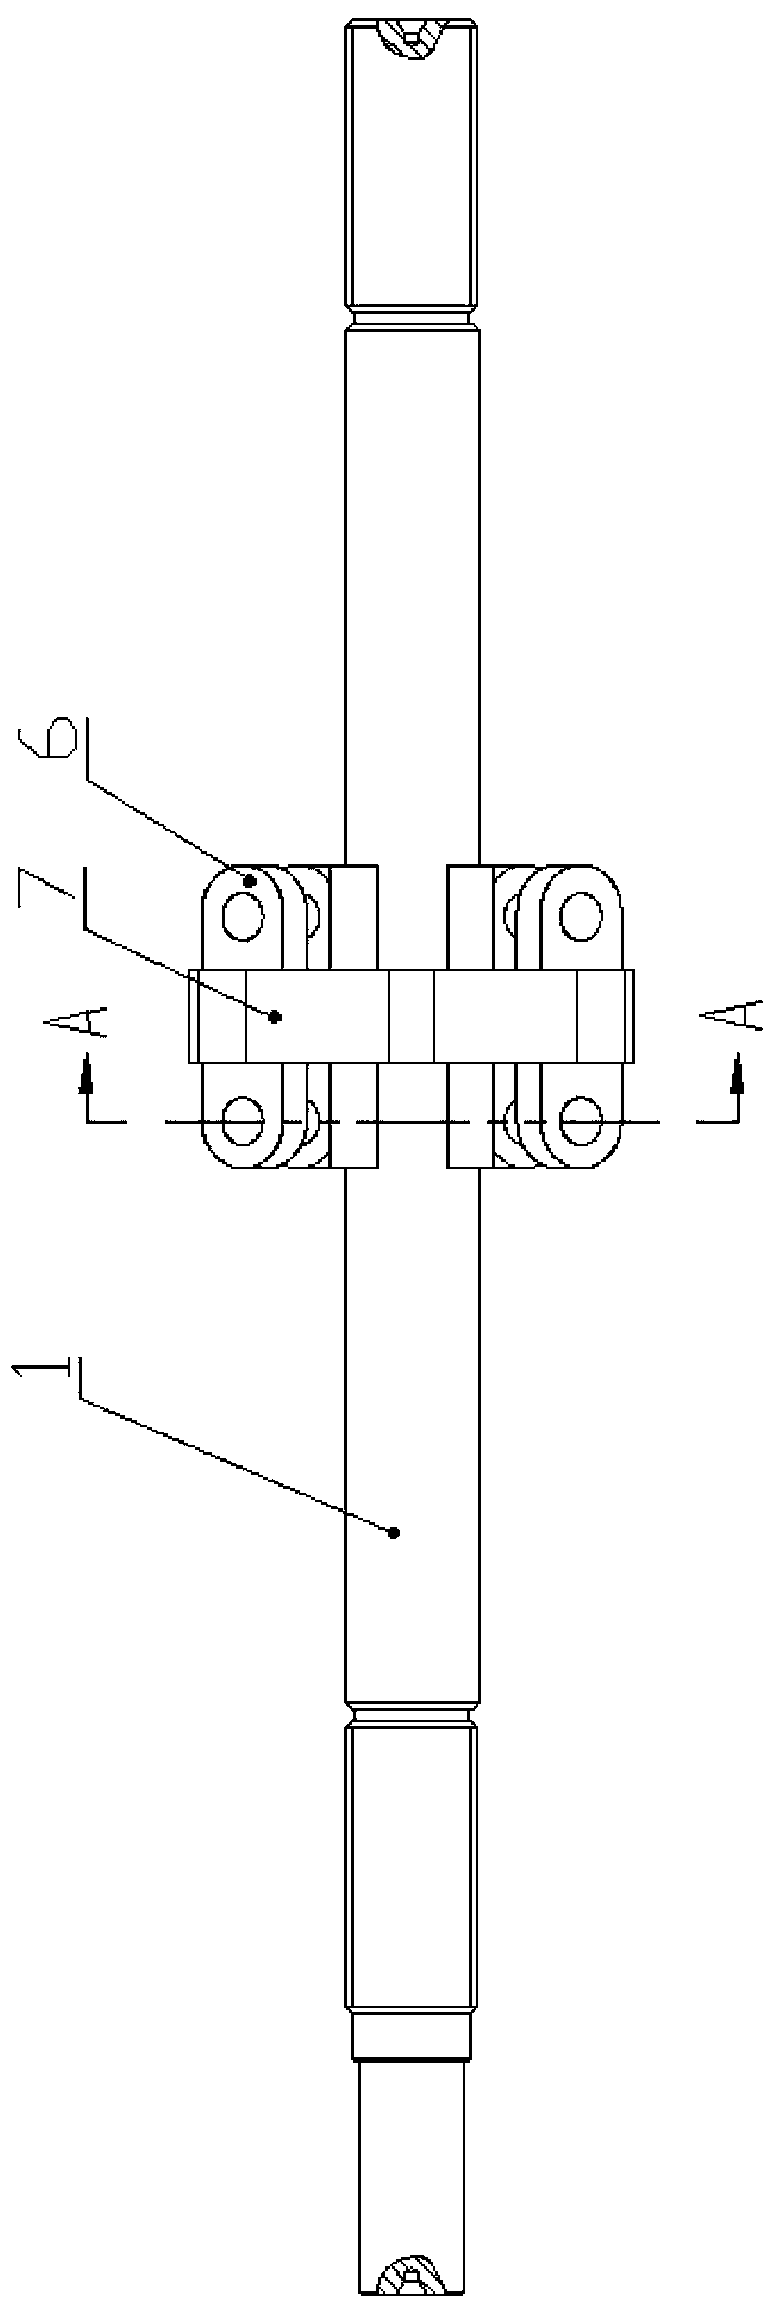 Self-centering hole inner clamping device capable of achieving automatic compensation and tension maintaining during part heating